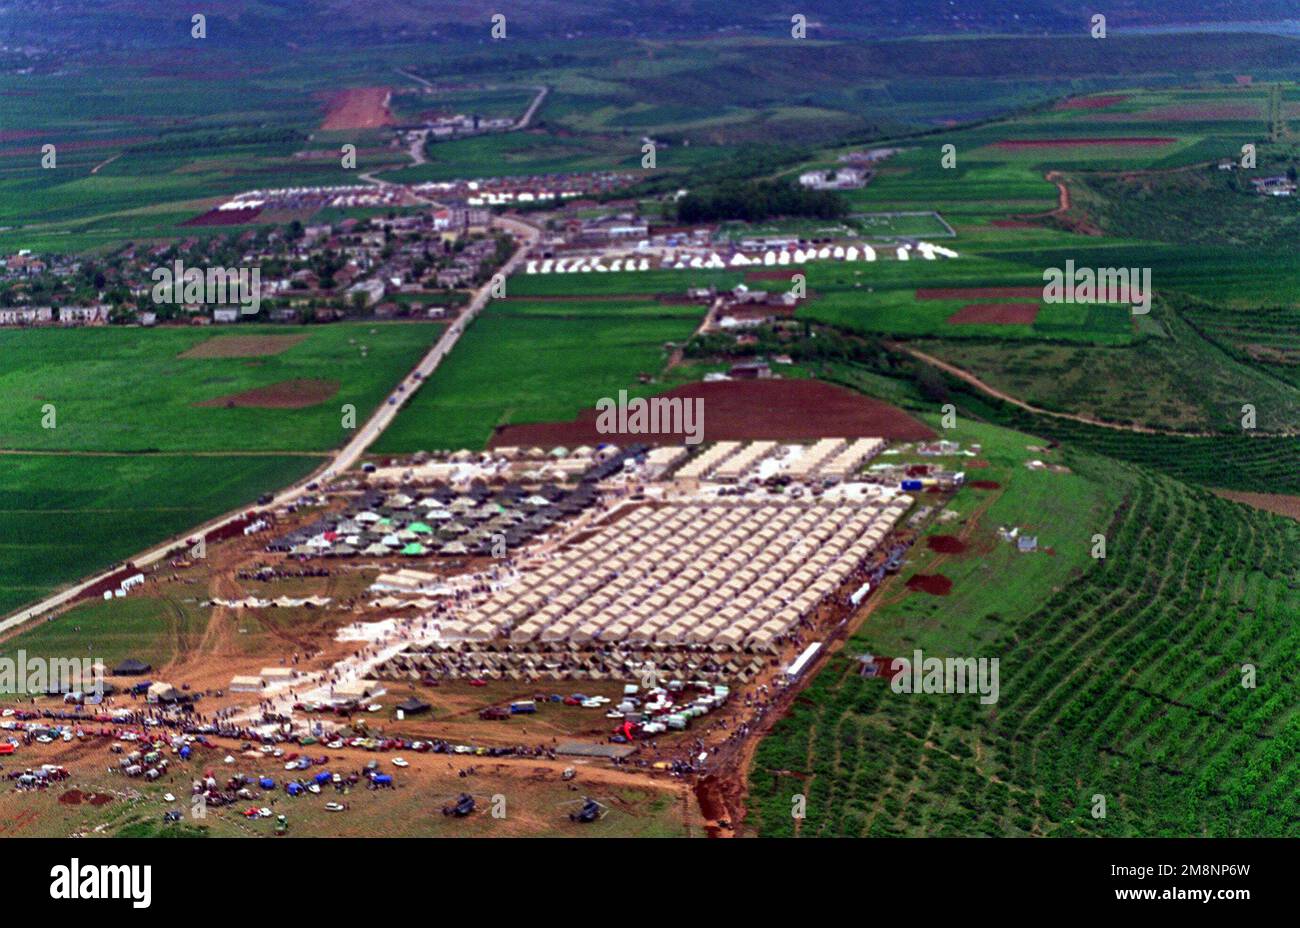 An aerial of a refugee camp near Kukes, Albania, from an MH-53E (not shown) from HM-15. HM-15 is currently embarked on the Amphibious Assault ship, USS INCHON (MCS-12) (not shown) which is operating in the Mediterranean and Adriatic Sea, supporting Operation Sustain Hope, a joint, combined NATO and U.S. military humanitarian relief effort in conjunction with civilian relief agencies. Operation Sustain Hope is bringing relief to thousands of refugees created from the recent unrest in the Kosovo region. Subject Operation/Series: SUSTAIN HOPE Base: Kukes Country: Albania (ALB) Stock Photo